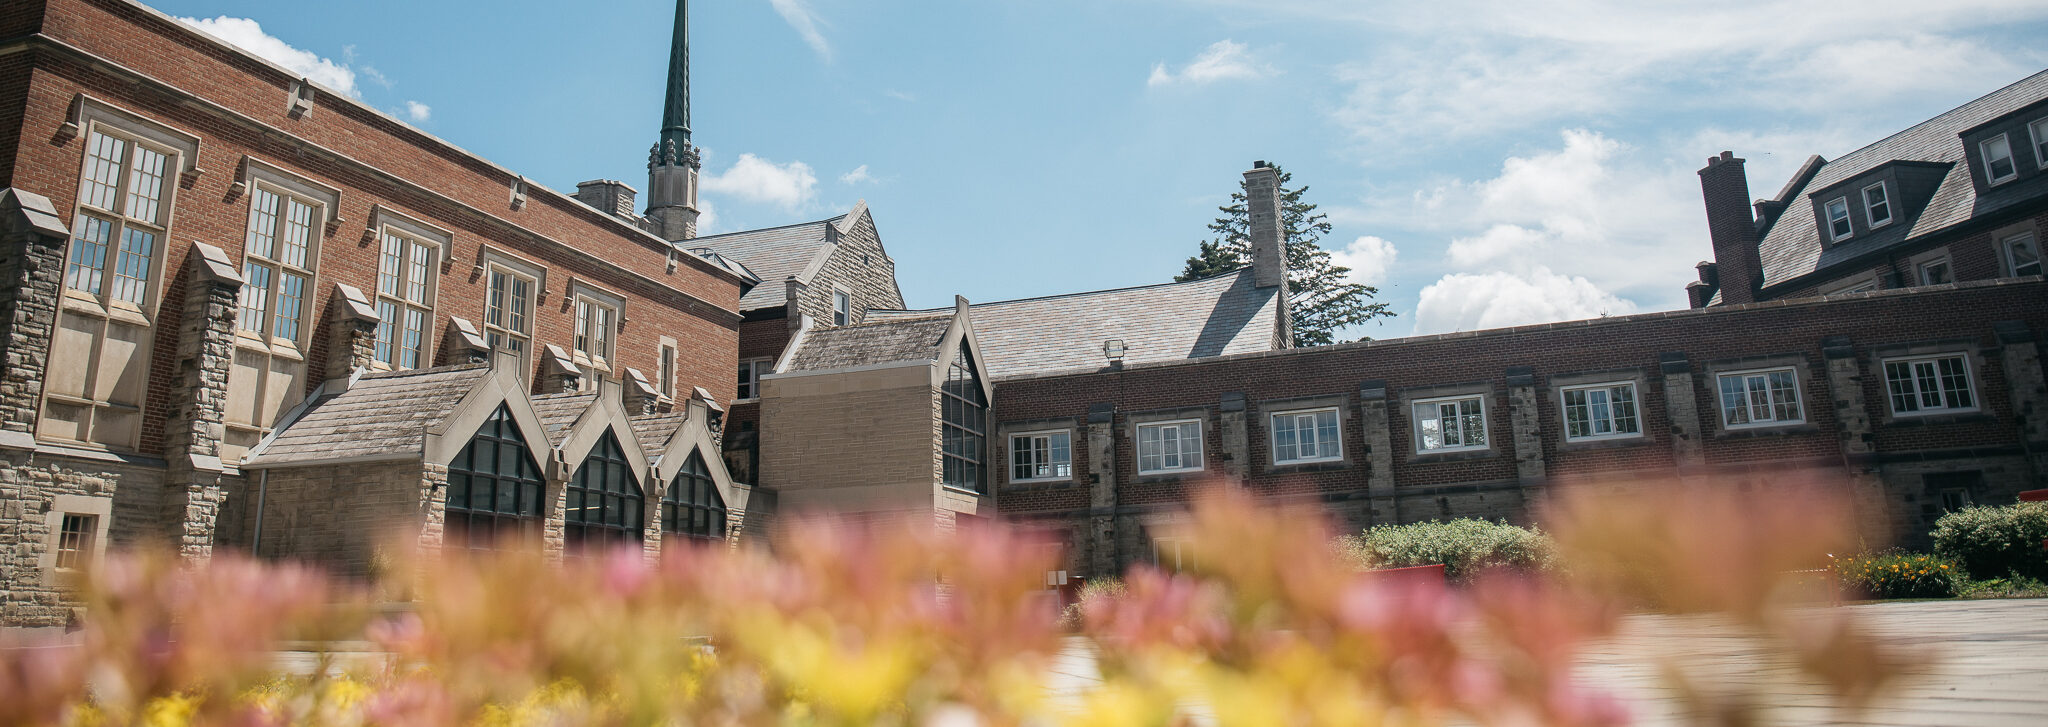 A photograph of Huron University College at daytime in the spring. A field of blurry flowers line the bottom of the foreground.